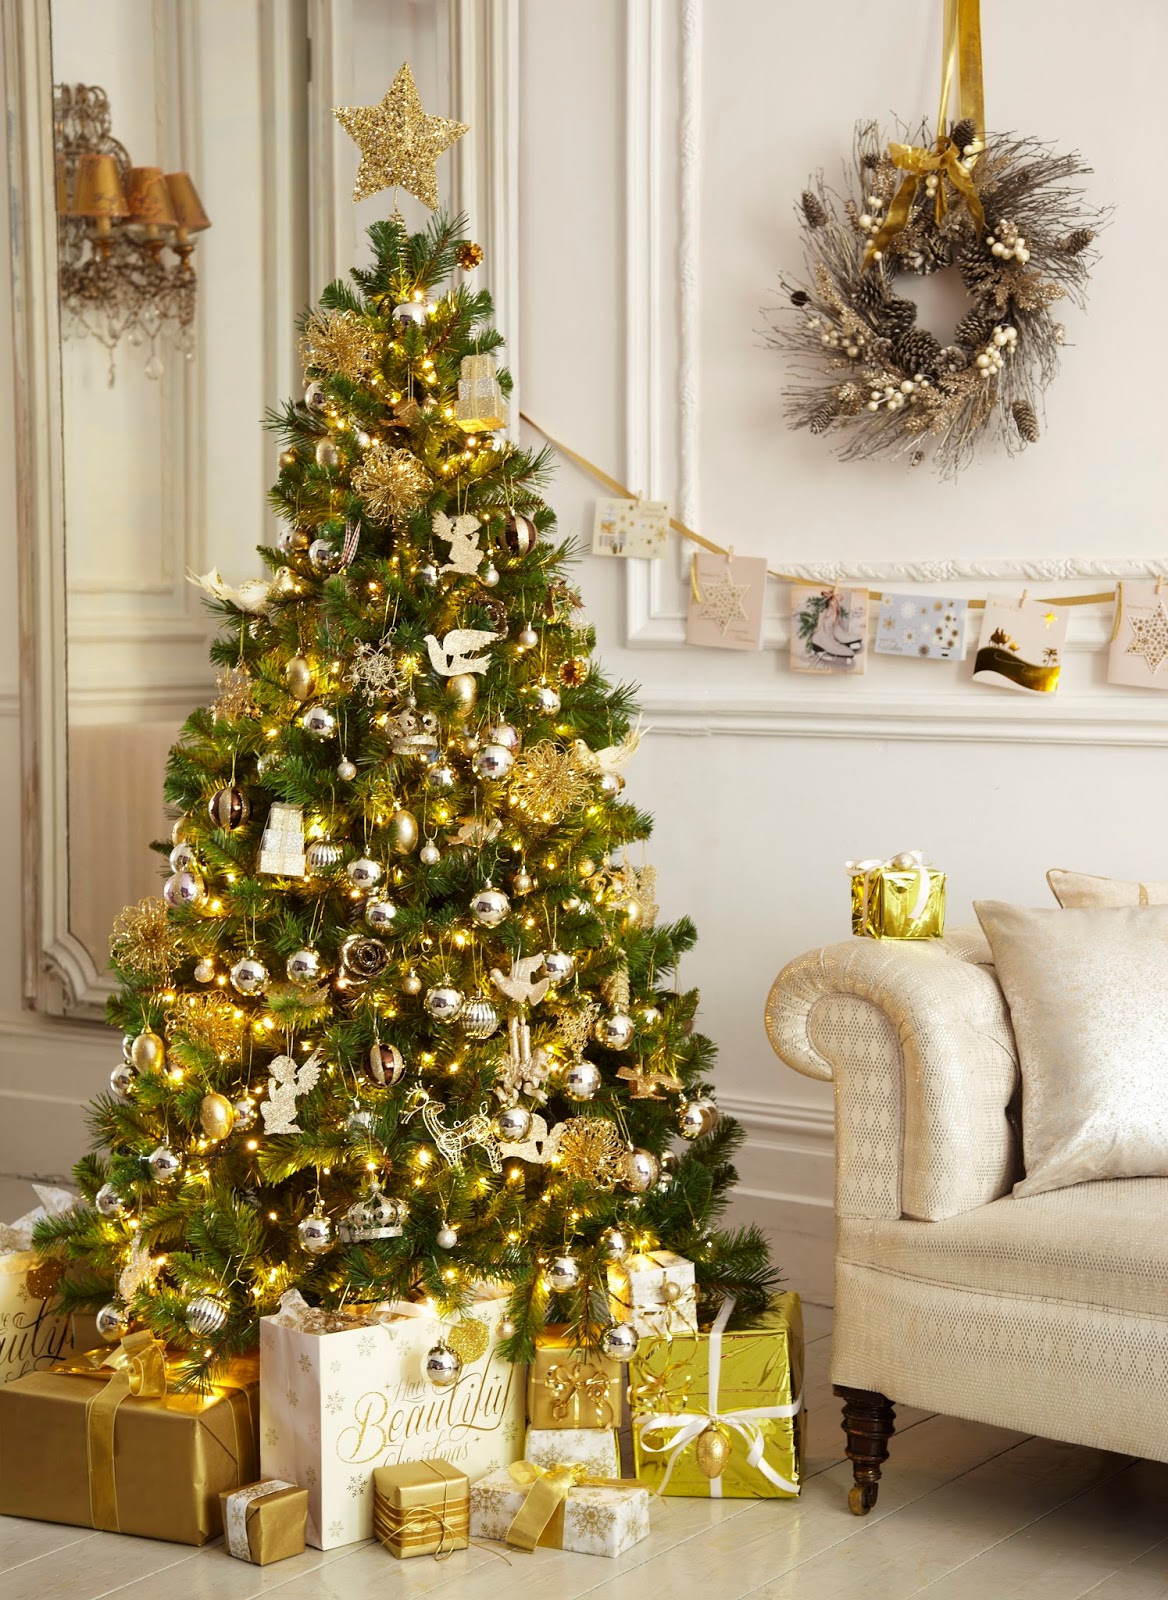 30 Gold Christmas Decorations Ideas For Home - Flawssy